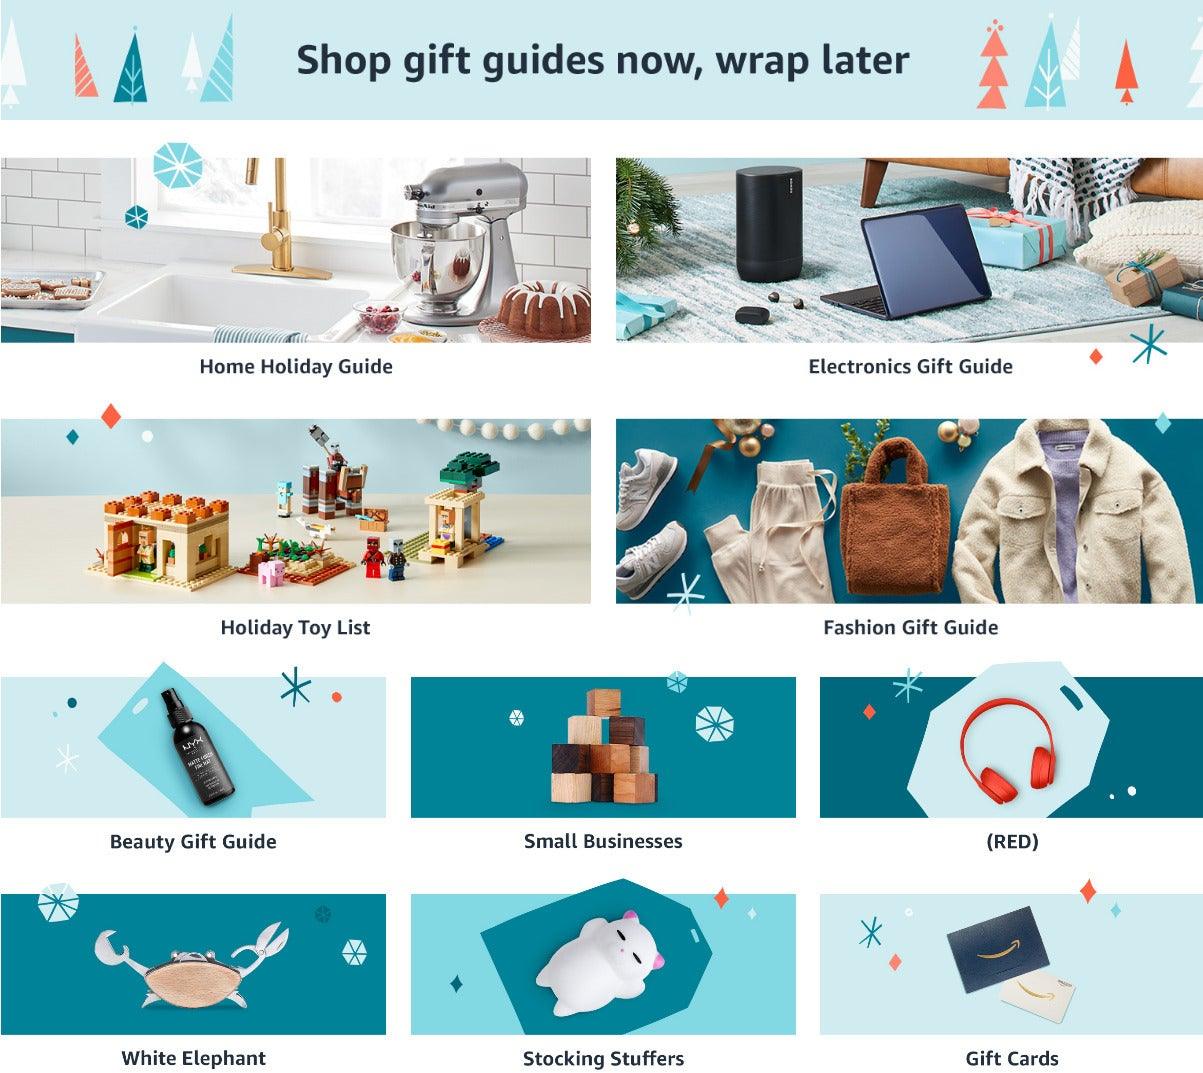 Shop Gifts for Everyone - The Amazon 2020 Holiday Guide Part 4 - 4aKid